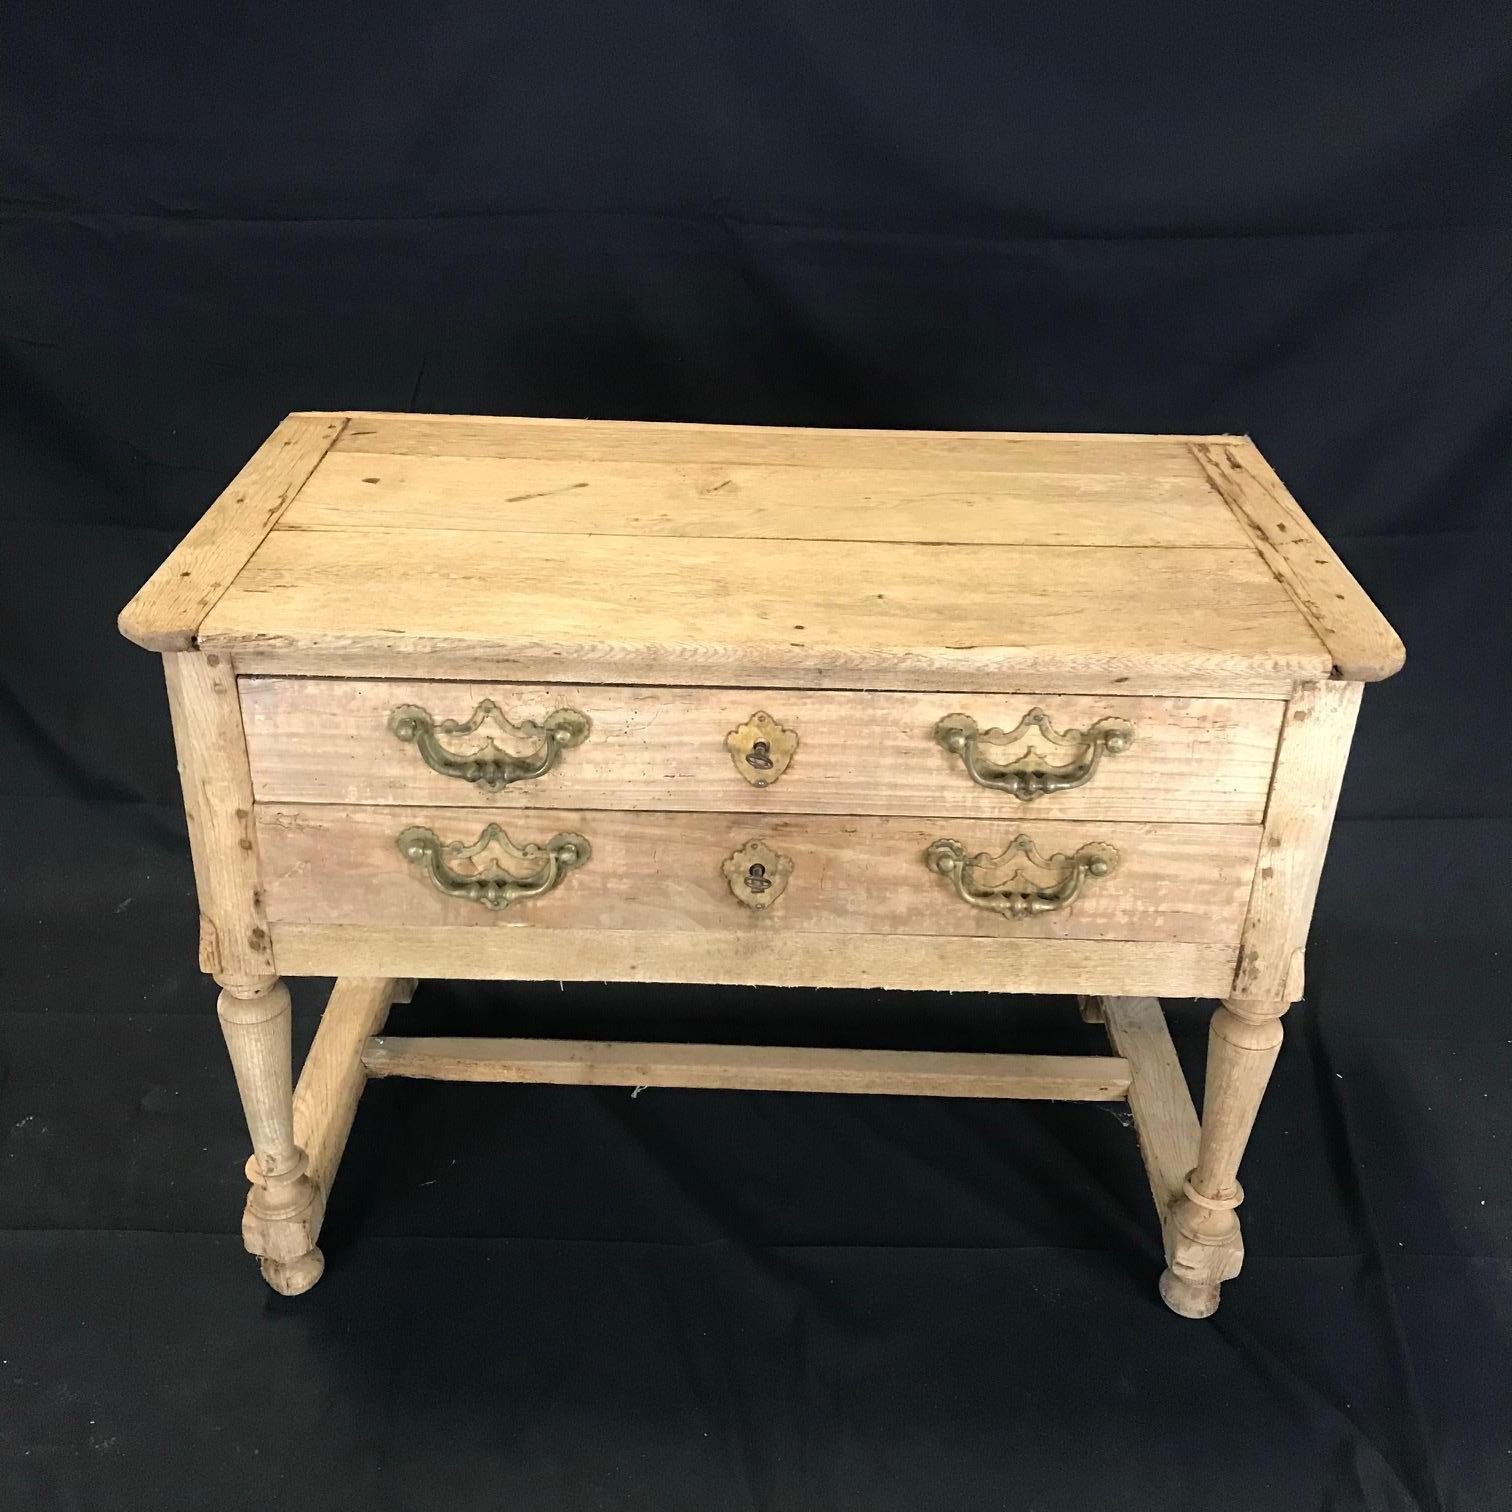 A charming unpainted rustic French side table or console having two drawers with keys.